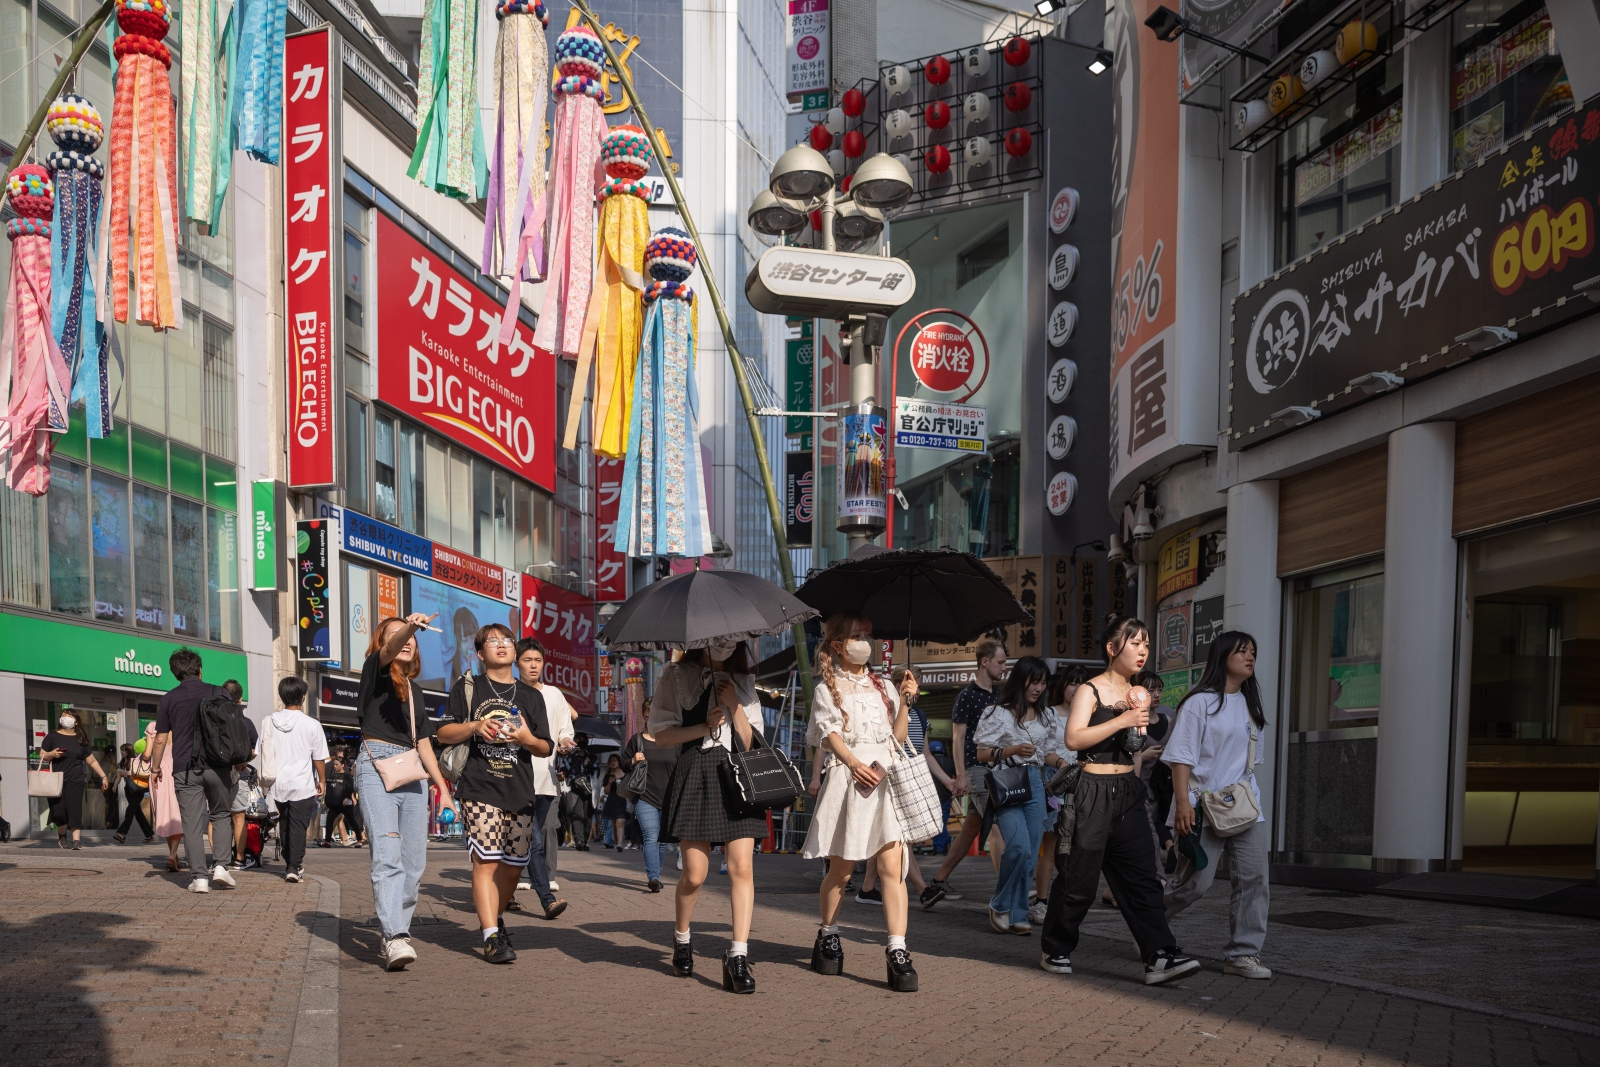 Pedestrians protect themselves from the sunshine with umbrellas on a day where the temperatures reached over 96 degrees Fahrenheit in Tokyo.